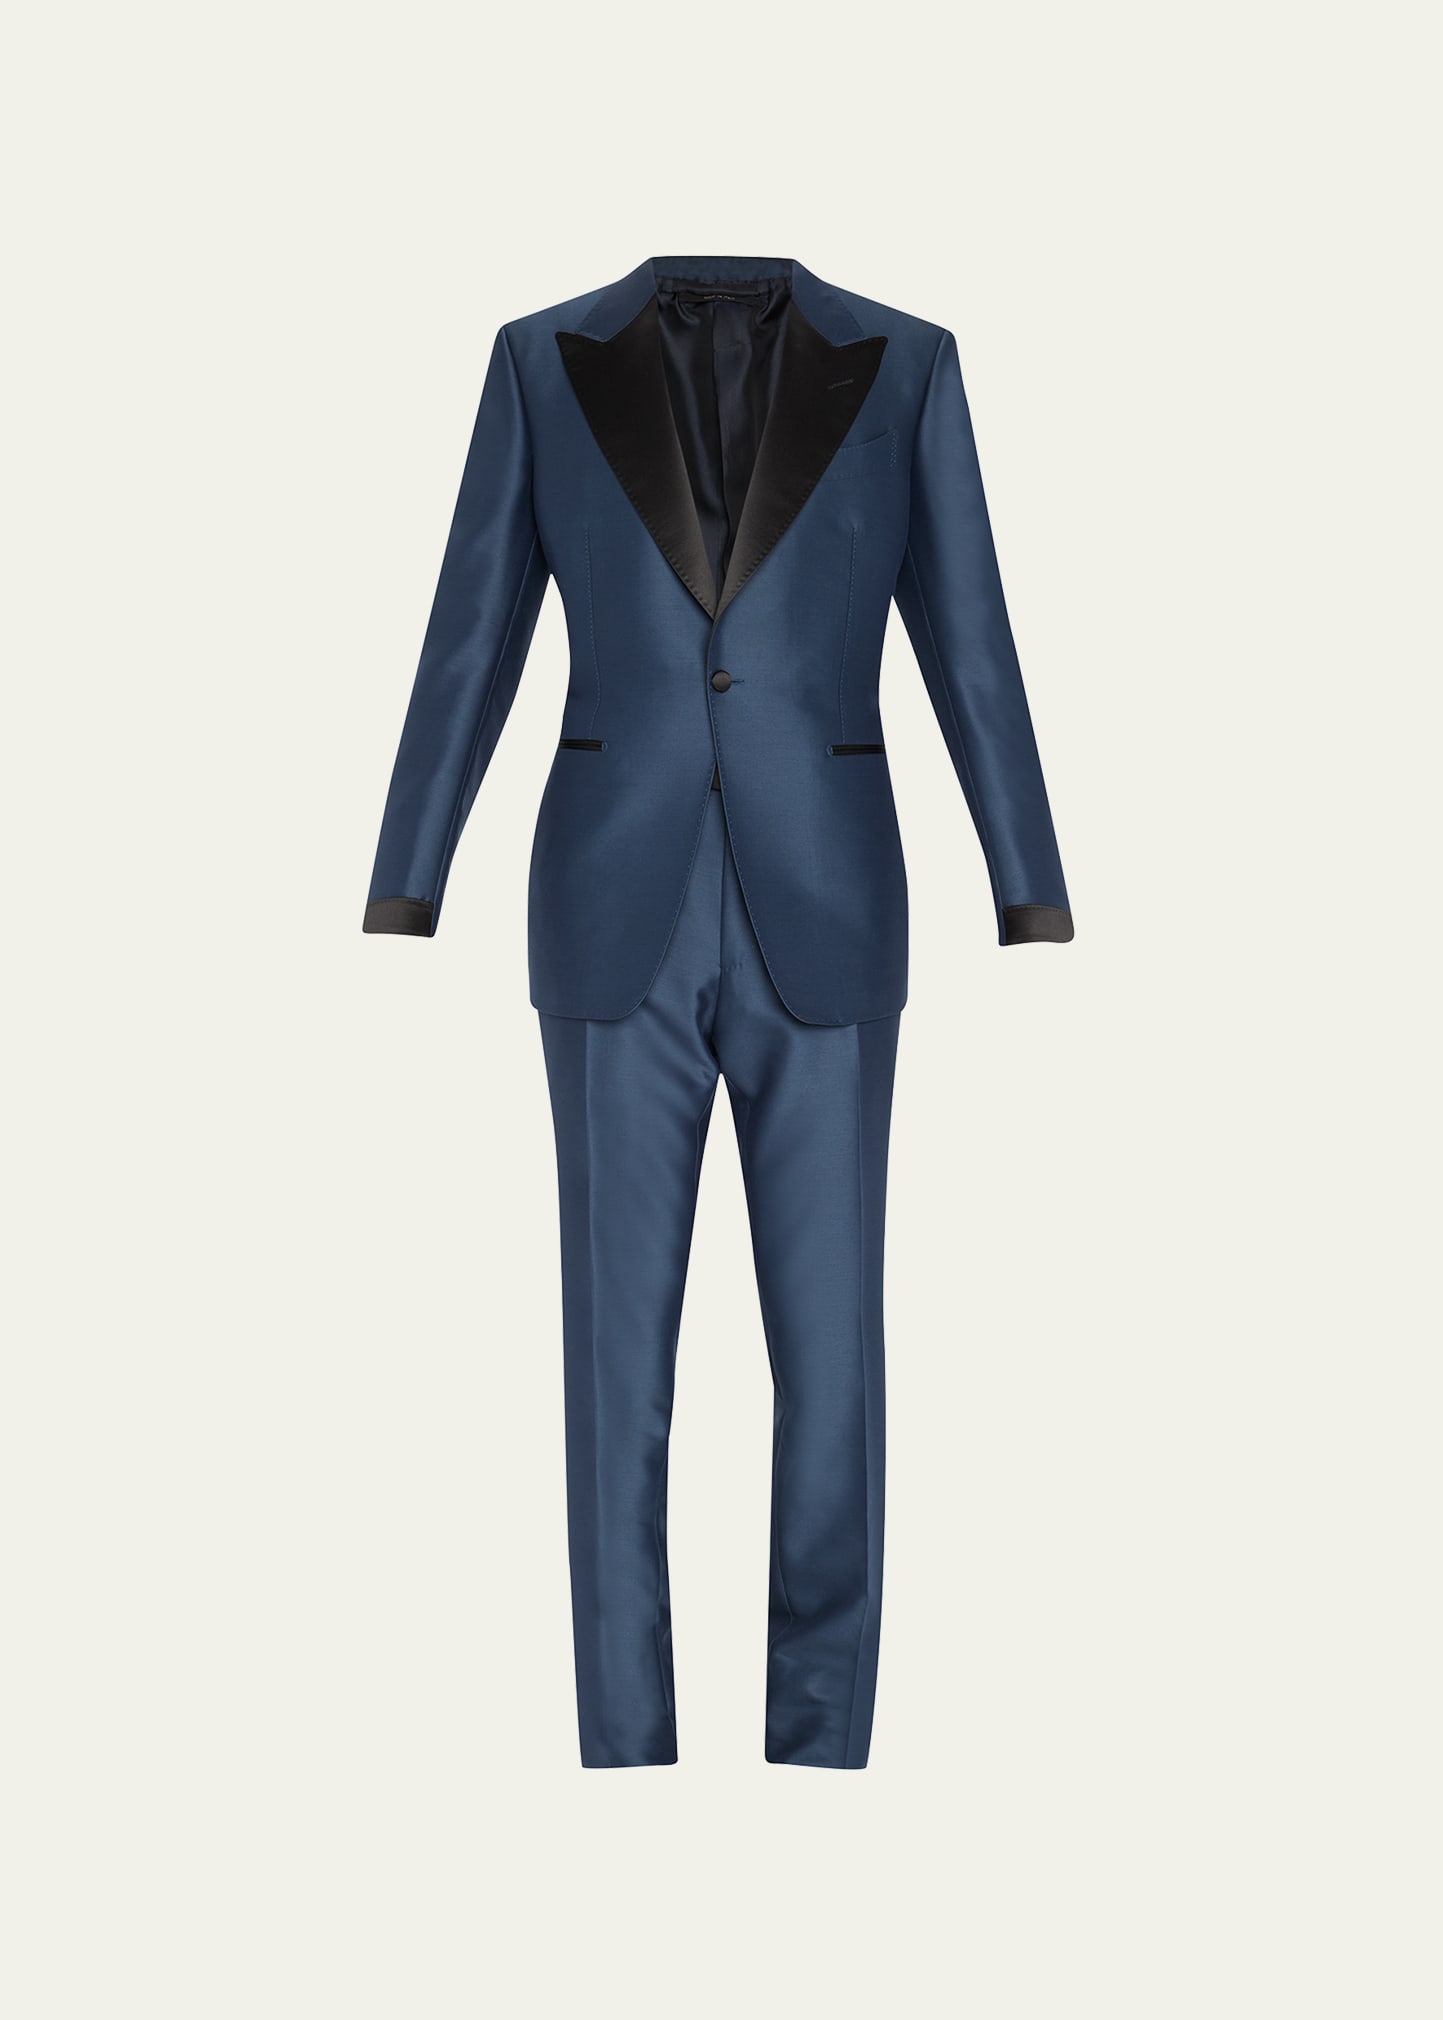 Tom Ford Men's Shelton Tuxedo With Contrast Trim In Dark Blue Solid